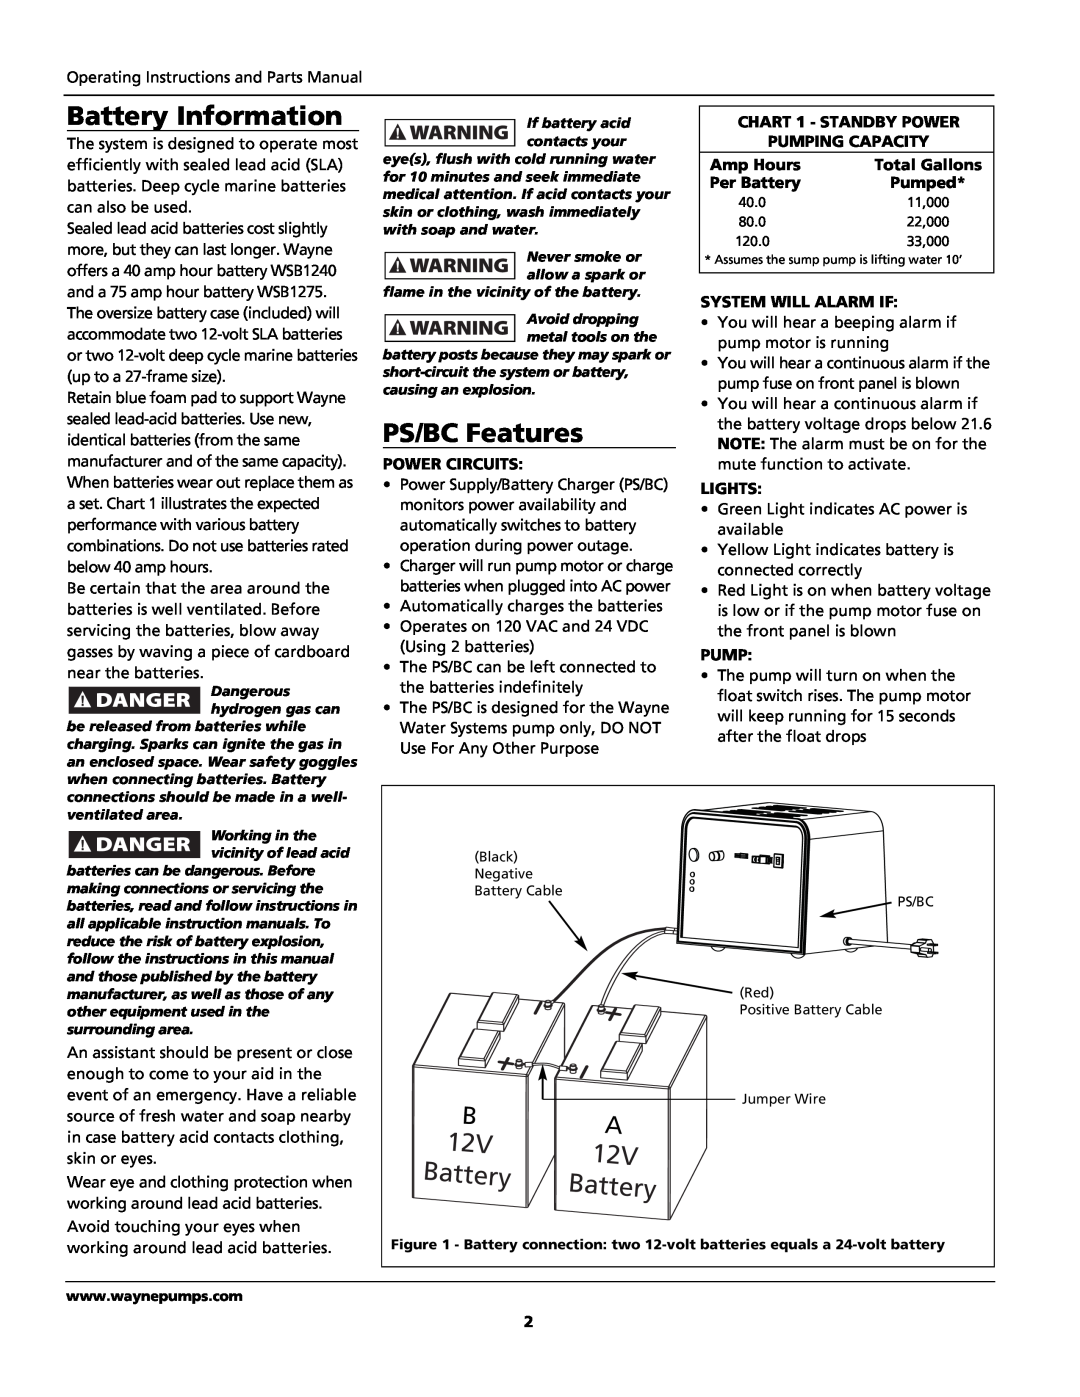 Wayne 353601-001 Battery Information, PS/BC Features, CHART 1 - STANDBY POWER, Pumping Capacity, Amp Hours, Total Gallons 